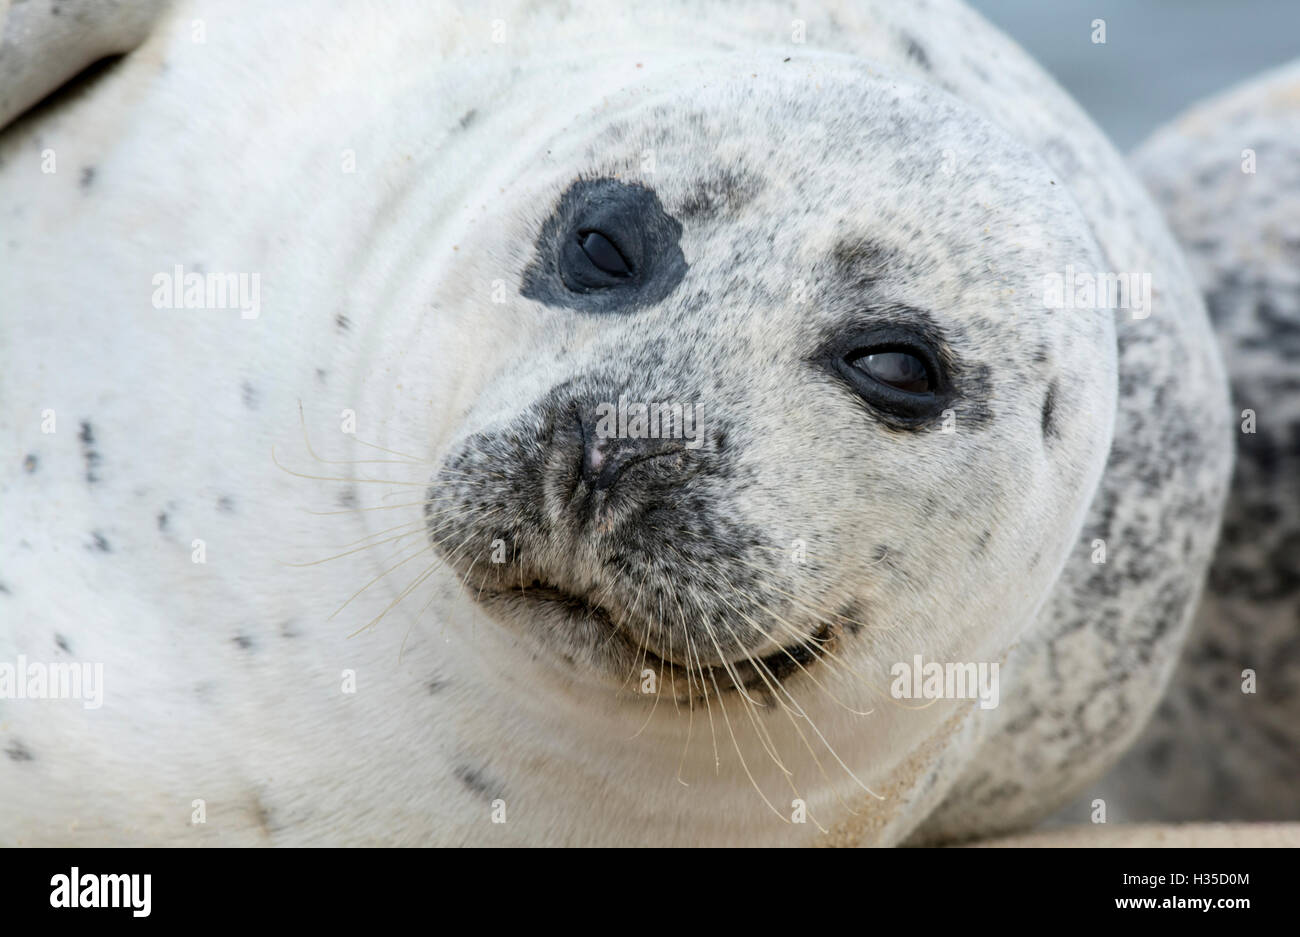 Common or harbour seal (Phoca vitulina), close-up of head Stock Photo